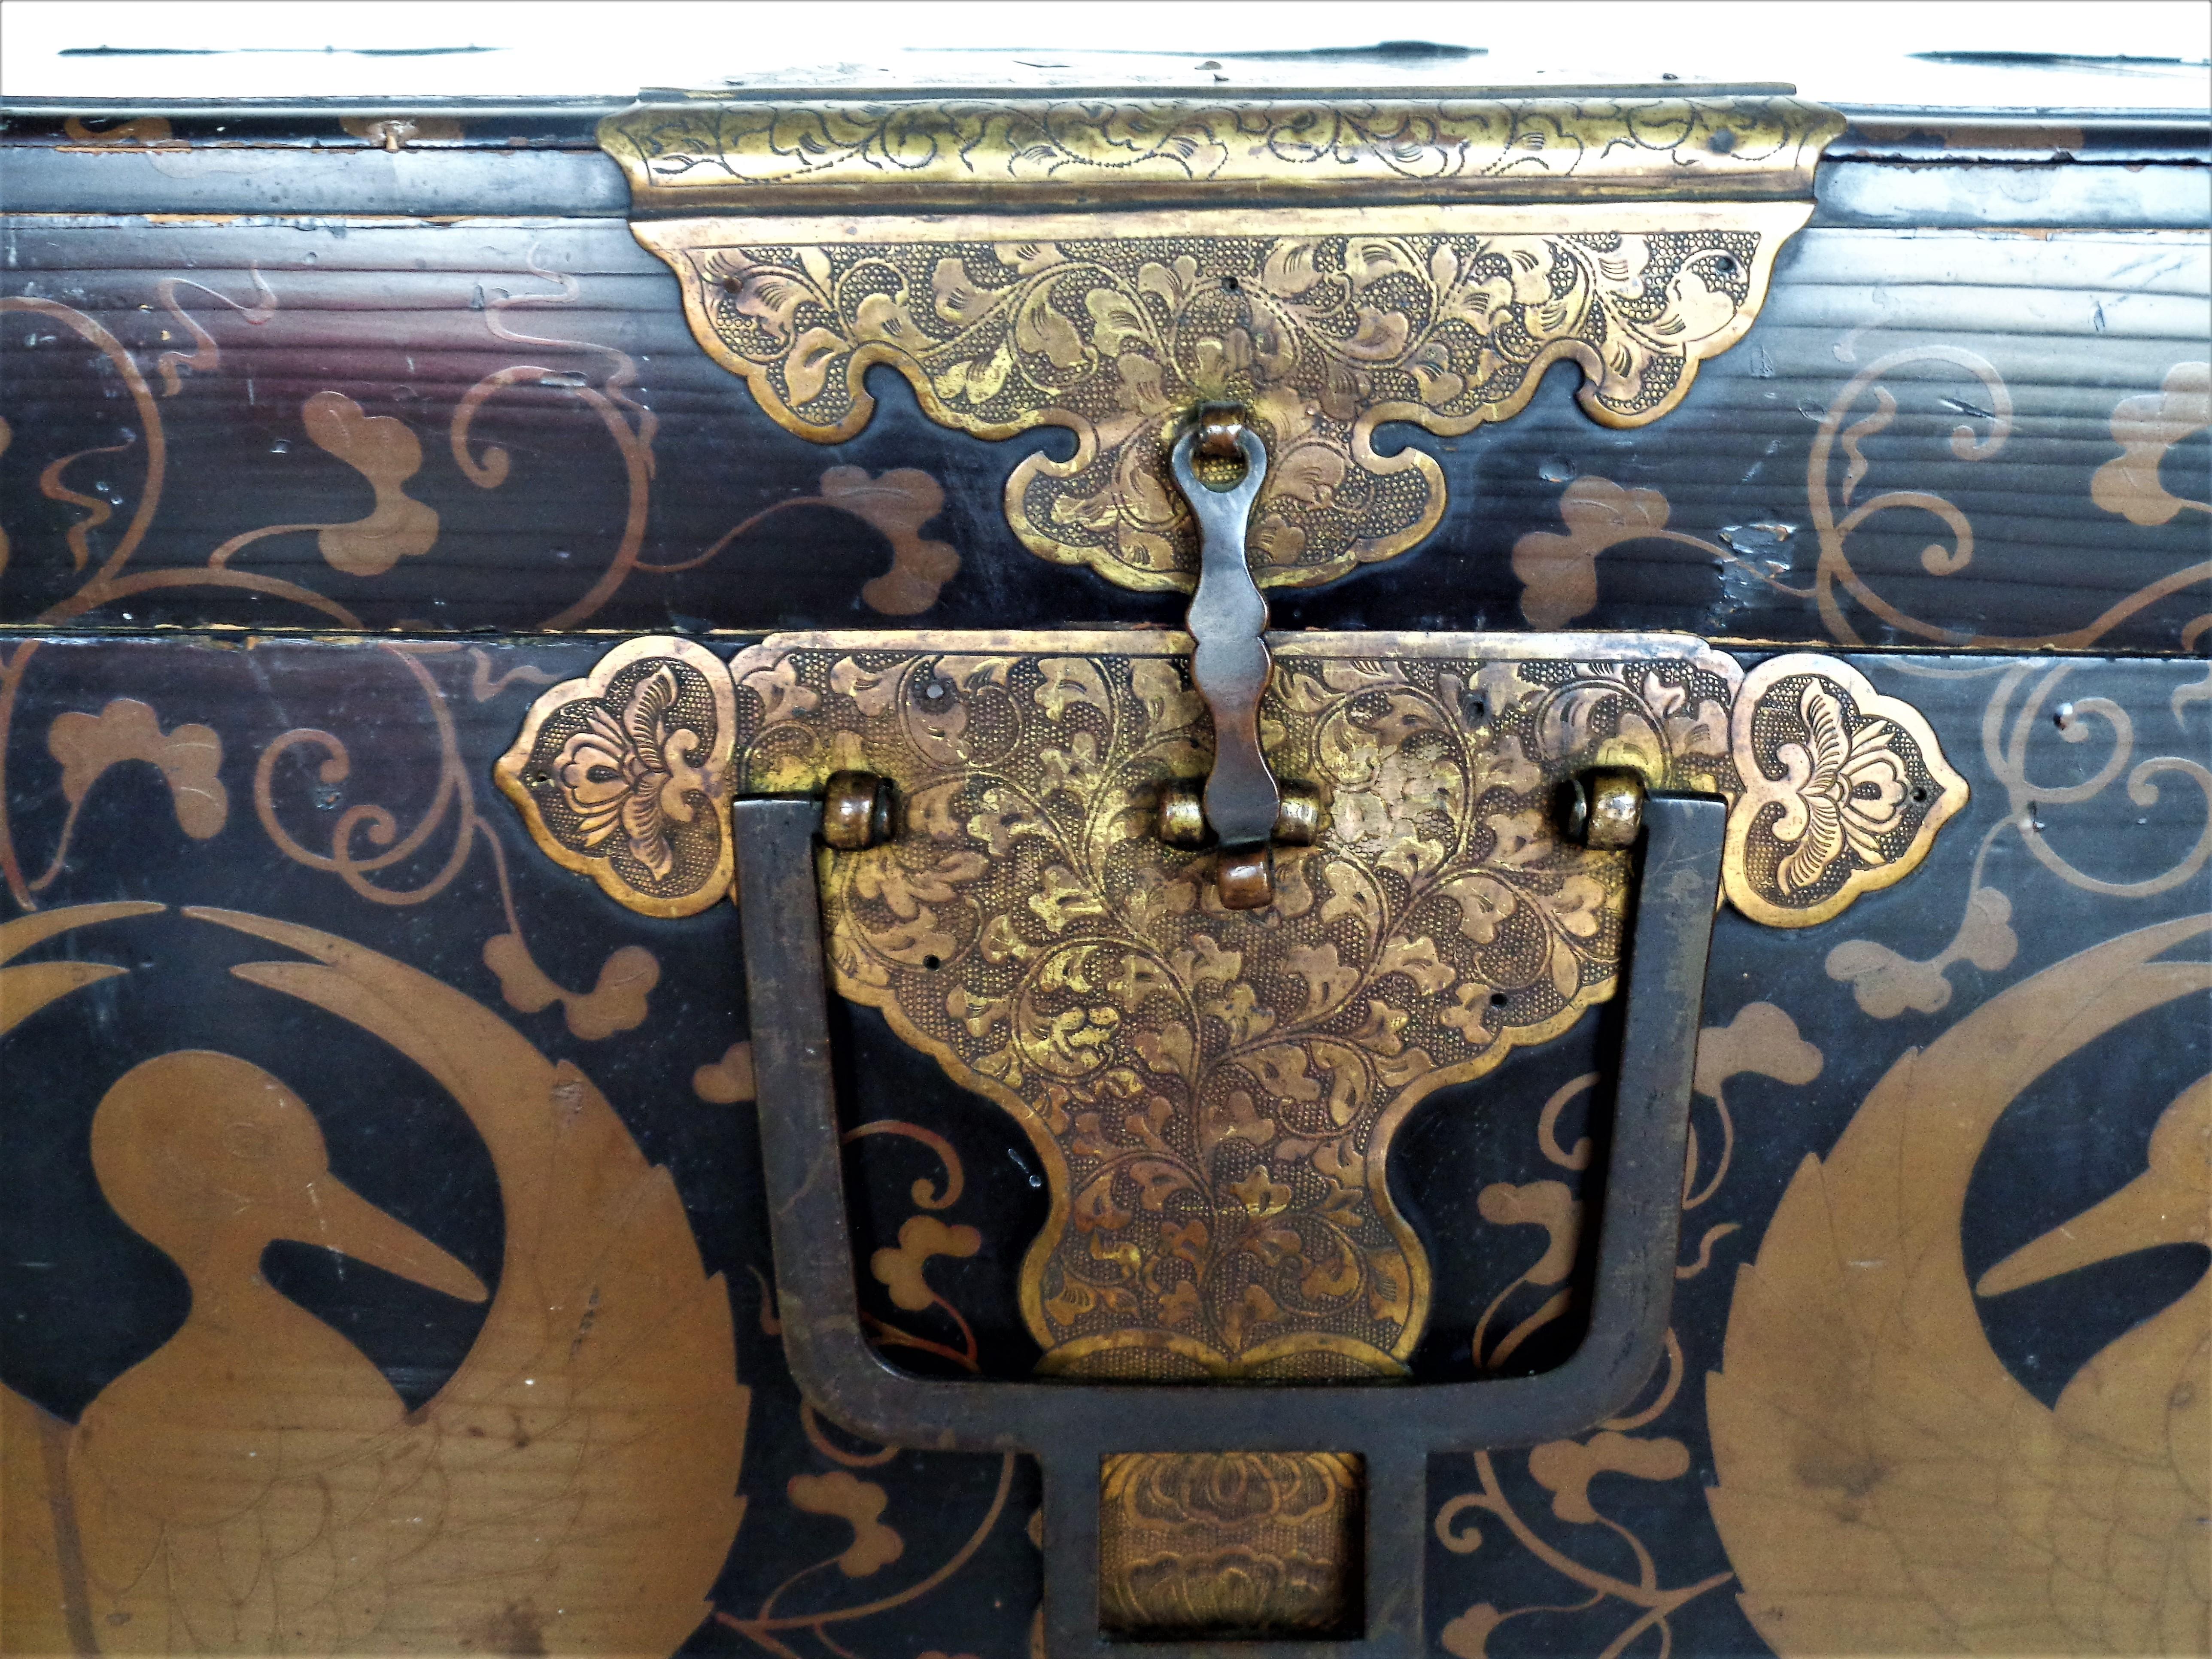 Antique Japanese Hasami-Bako / traveling chest for textiles, garments, kimono. Black lacquer & gold maki-e, finely incised gilt metal mounts, decorated paper interior lining. Mid 19th century. Beautiful. Look at all pictures and read condition